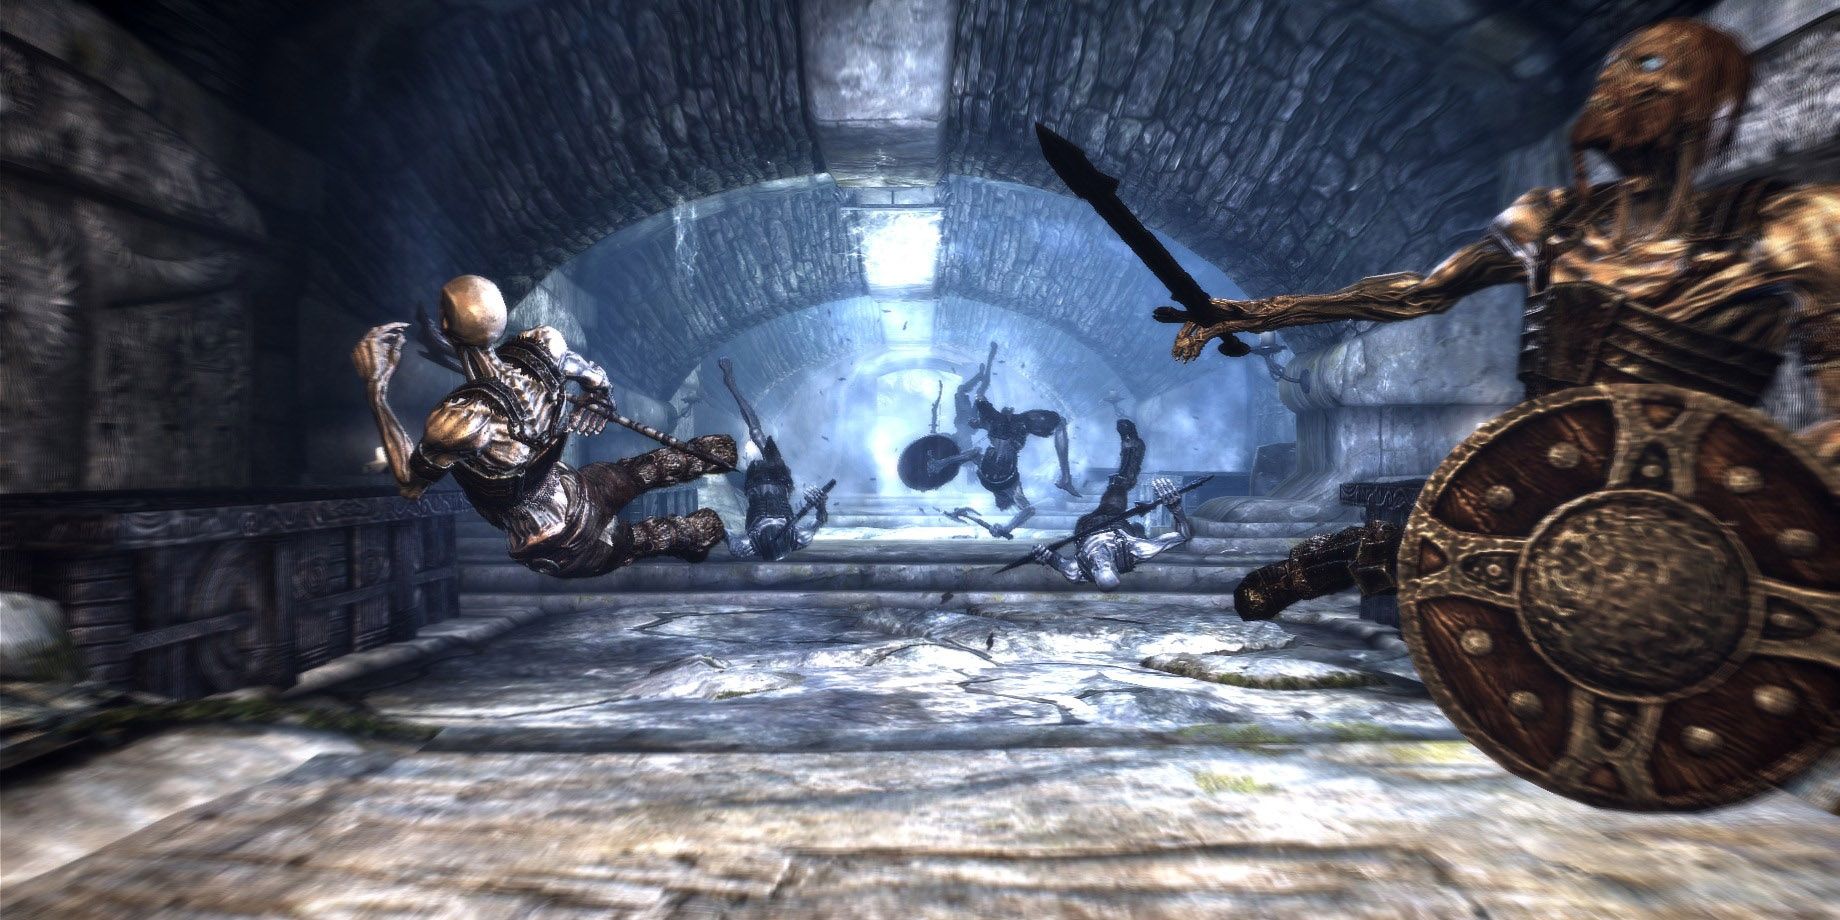 Draugr fly through the air as they are Fus Ro Dah'd in The Elder Scrolls V: Skyrim